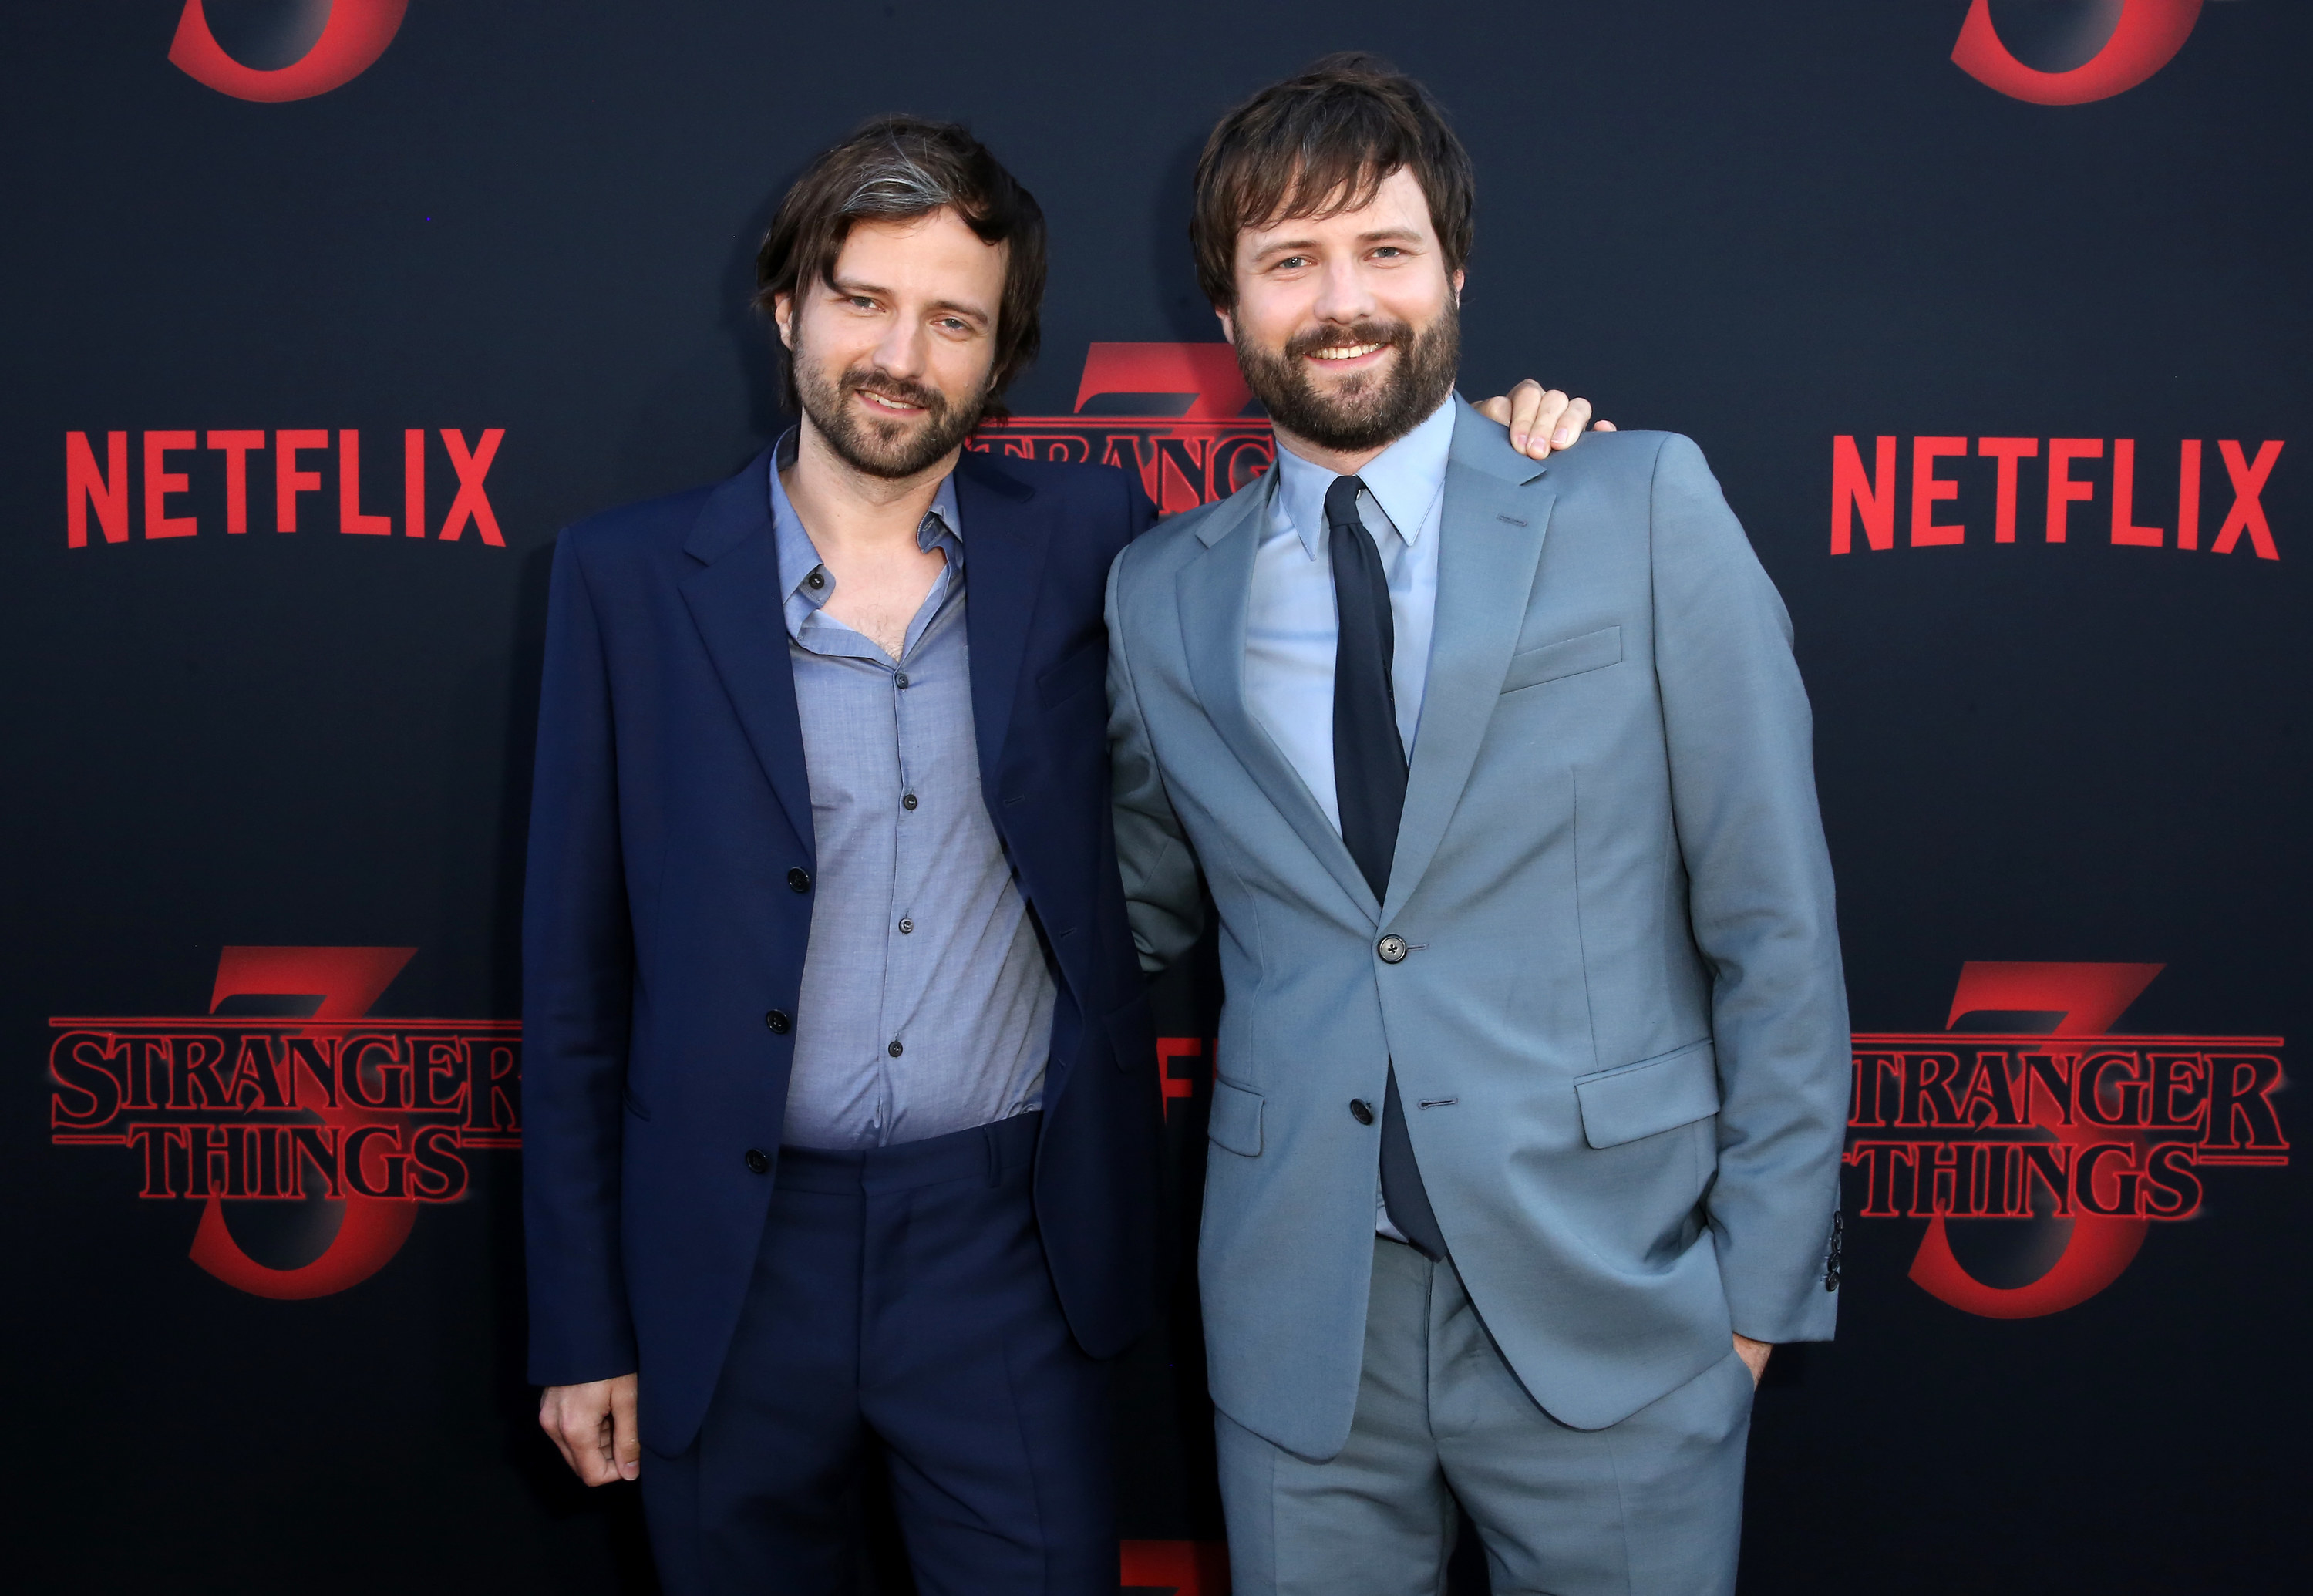 The Duffer brothers wearing suits at the Stranger Things season 3 premiere